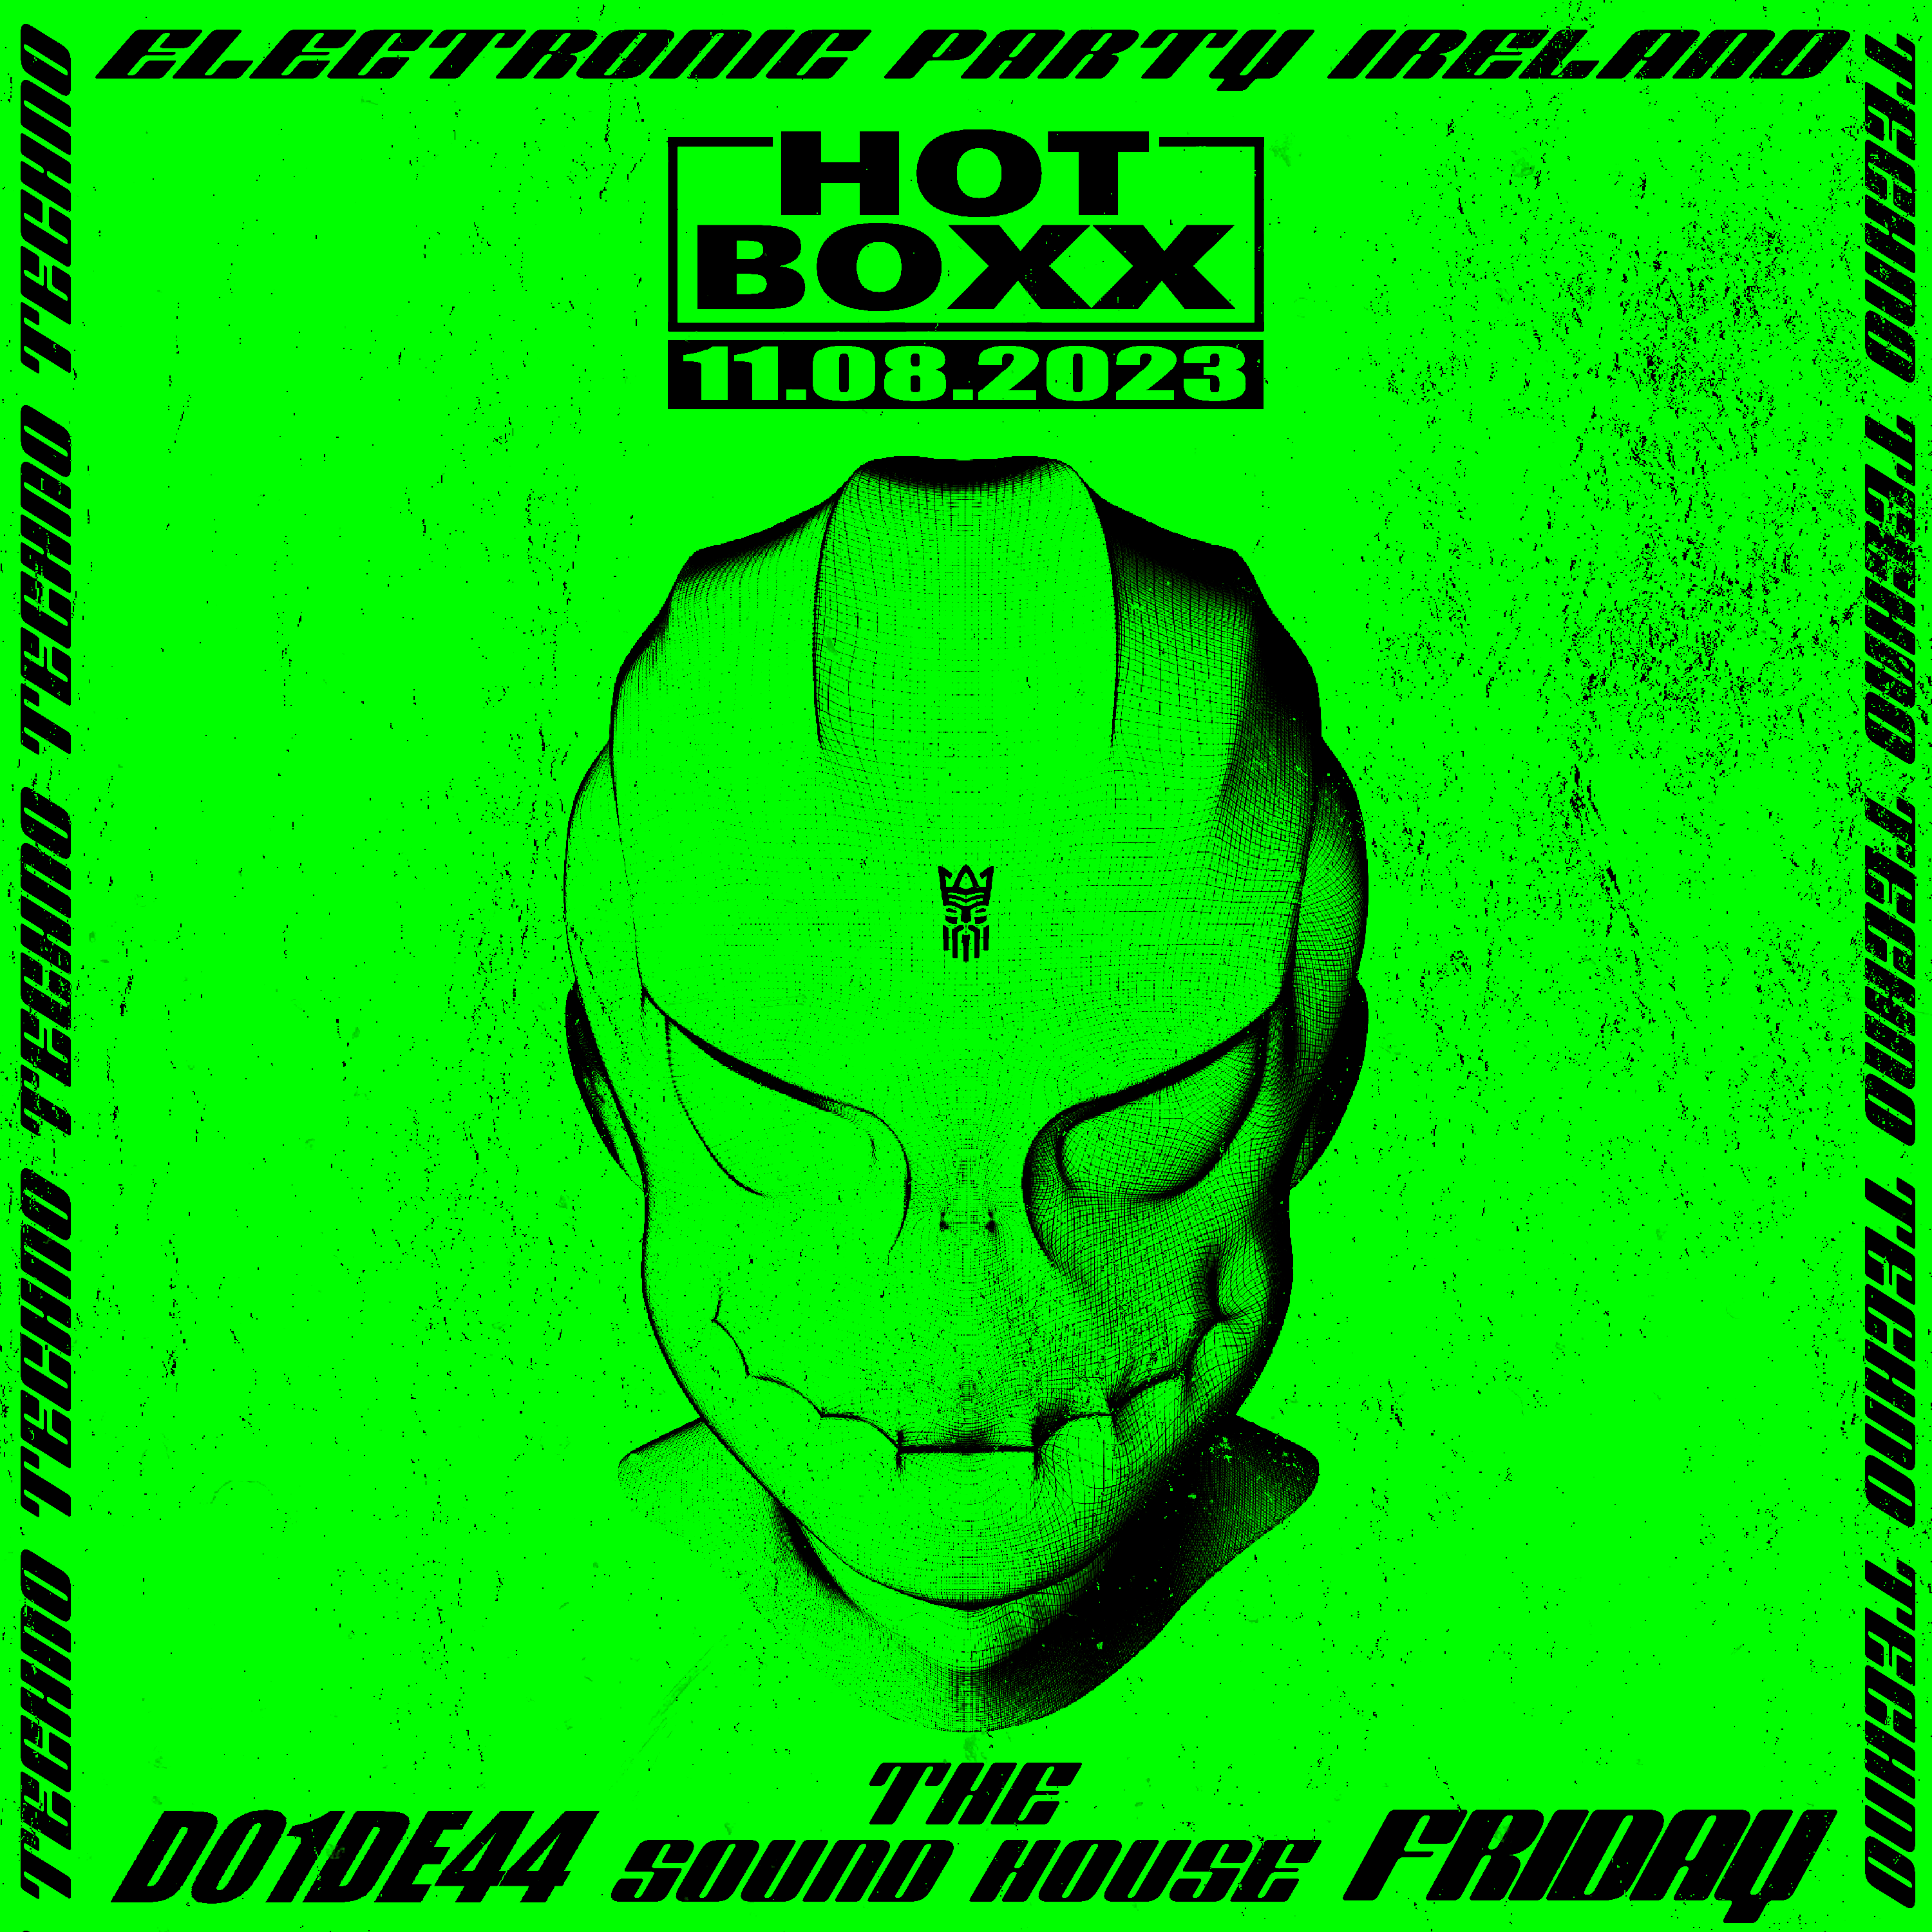 Techno Cage Rave: HOTBOXX - Aug 11th - フライヤー表